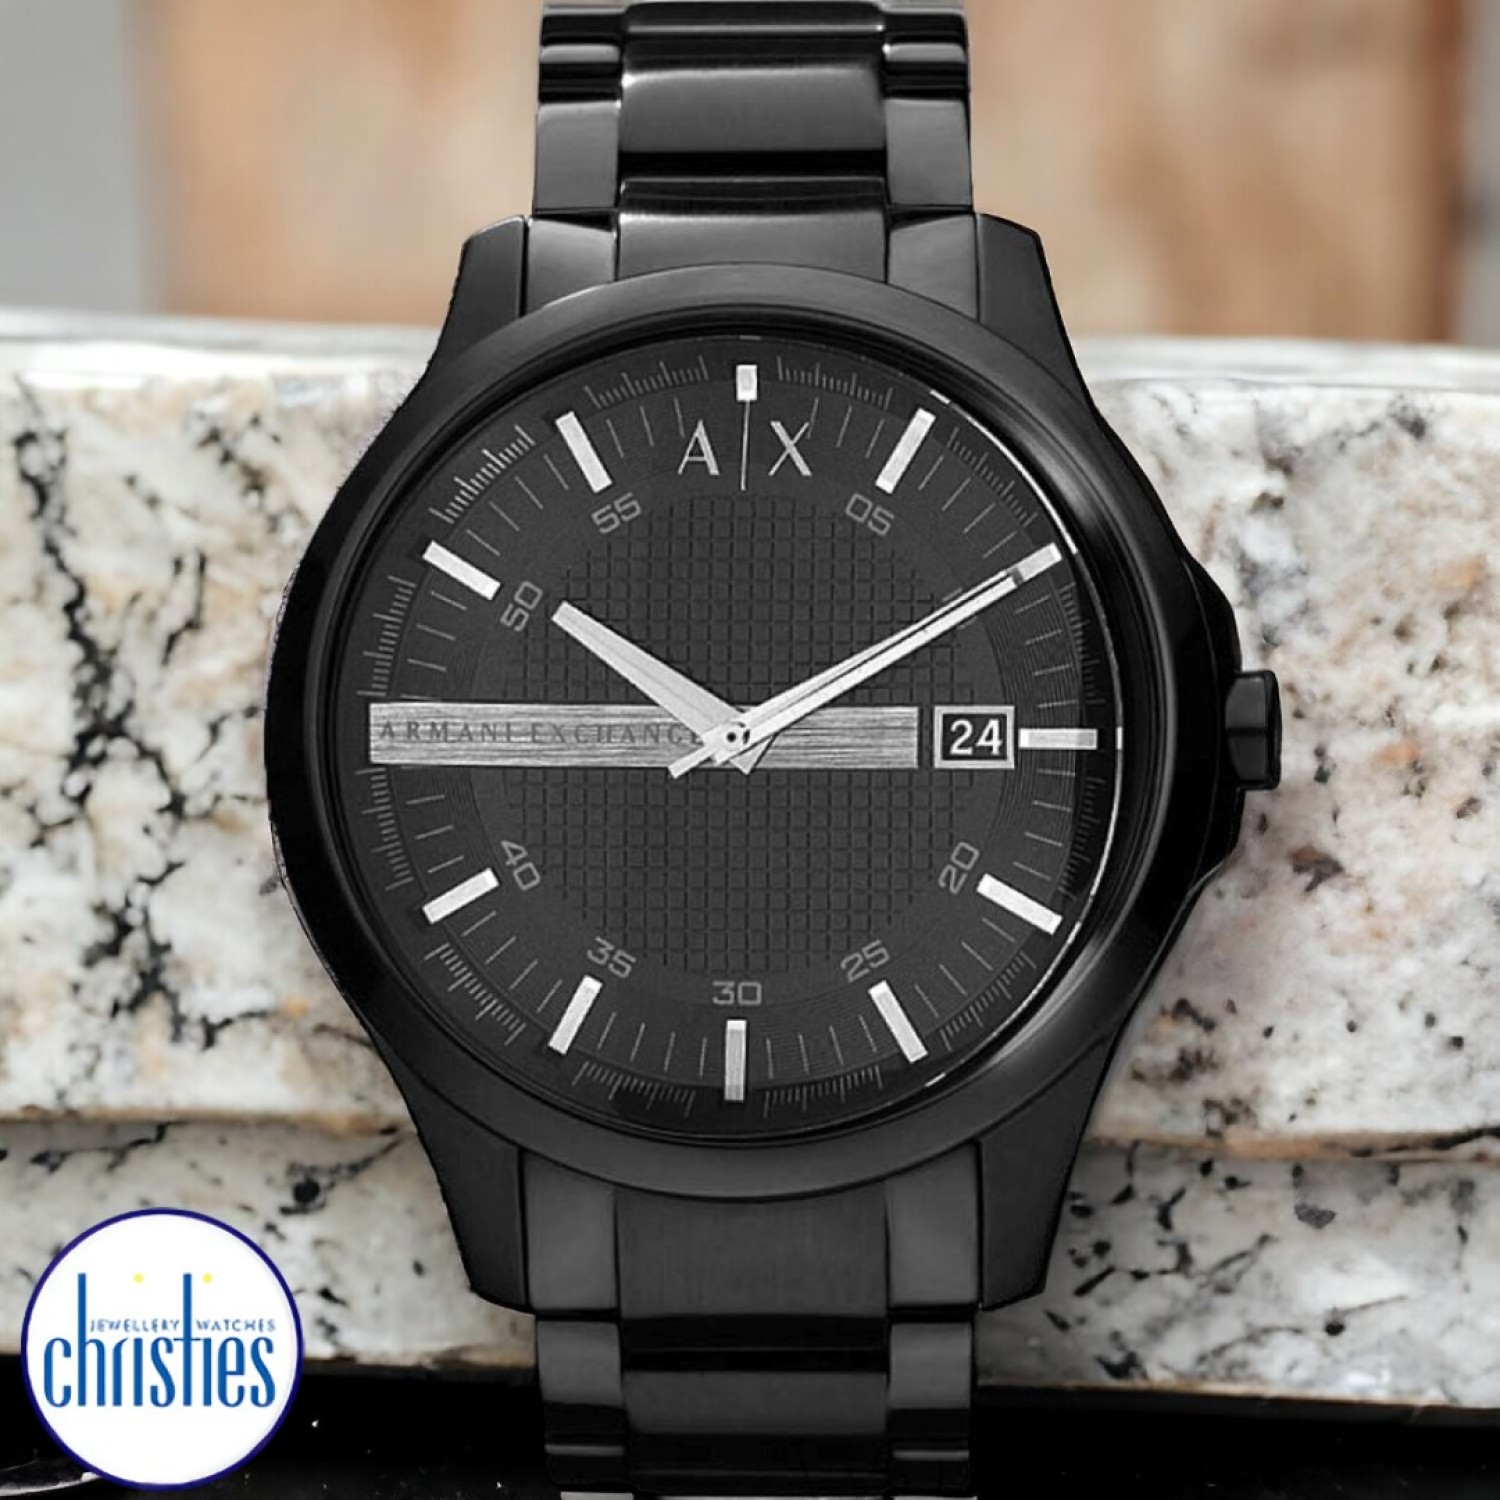 AX2104 A|X  Armani Exchange Watch. The stylish AX2104  mens Armani Exchange watch in Black IP plated stainless steel features a 47mm case and centred on a black dial with silver baton hour markers and date function. The watch is fitted with quar @christie